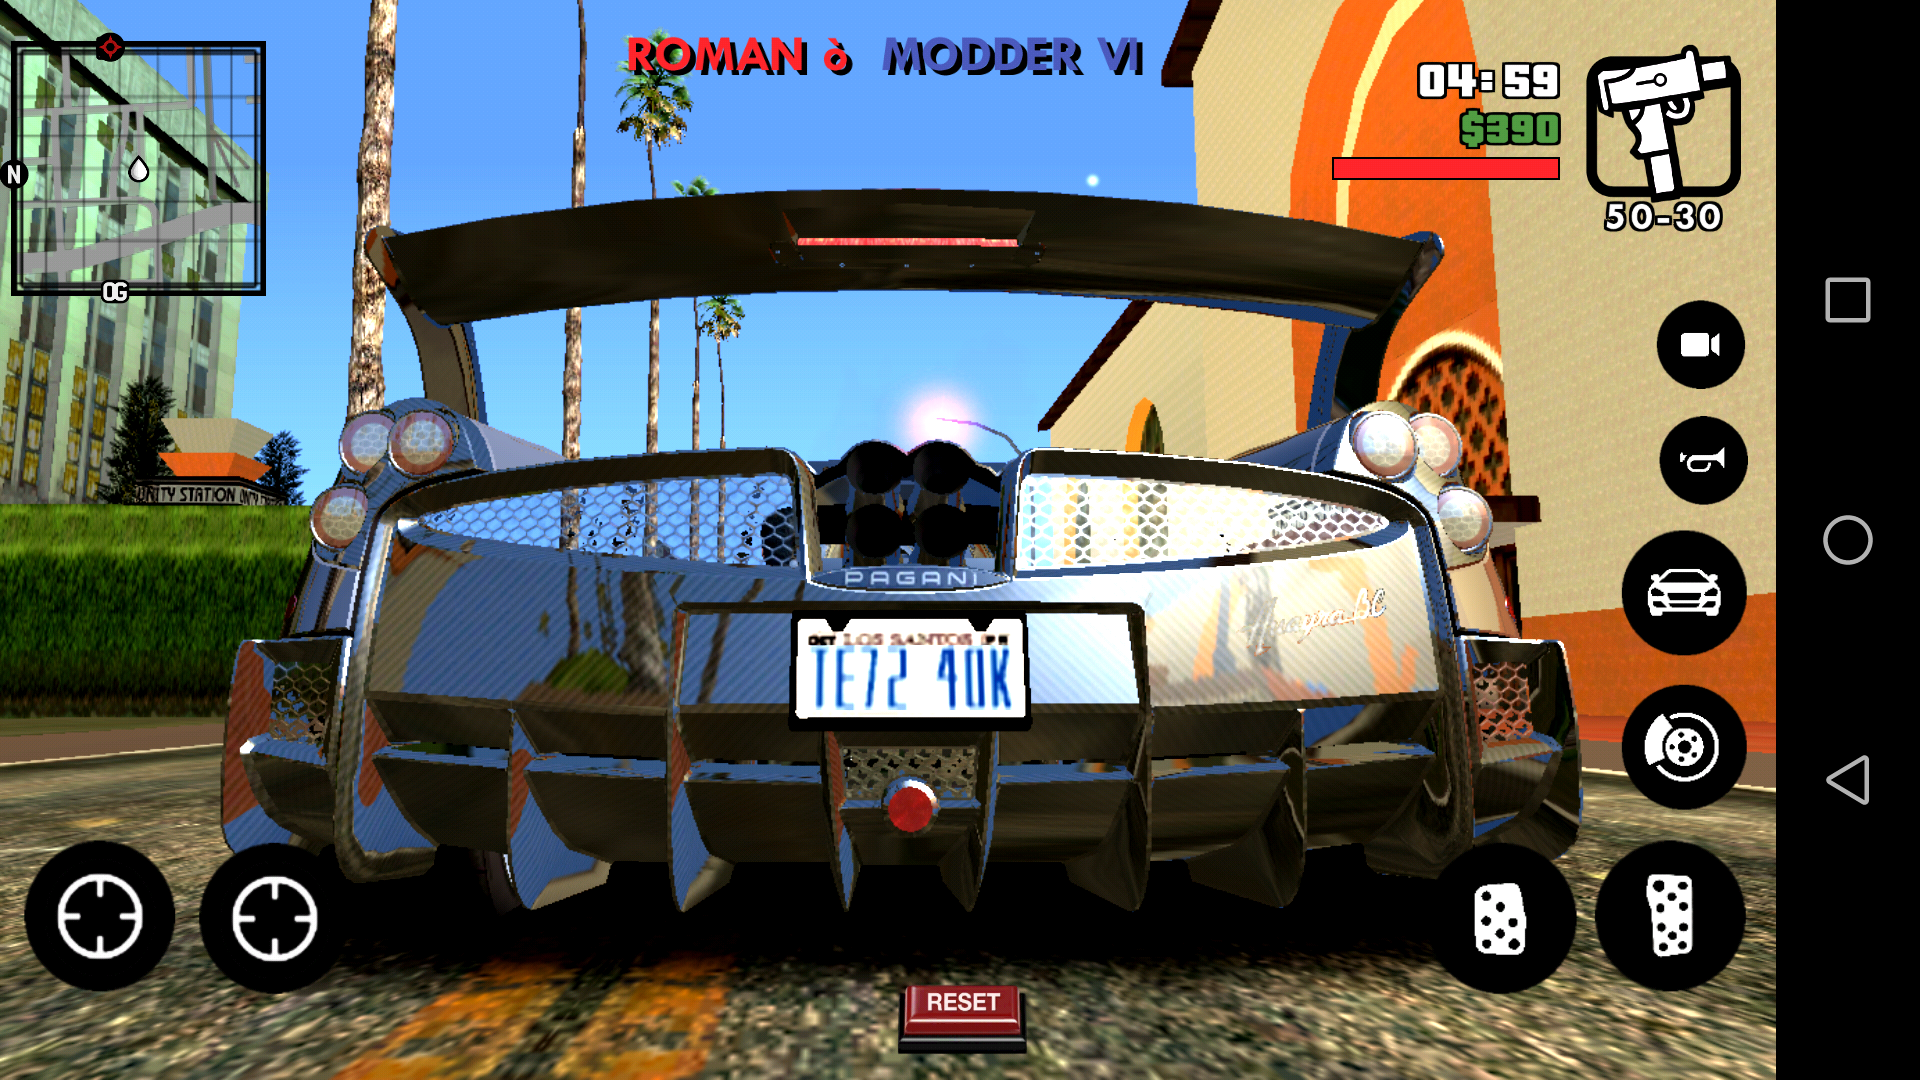 Gta San Andreas With Gta V Mods For Android Download Roman Modder Gaming